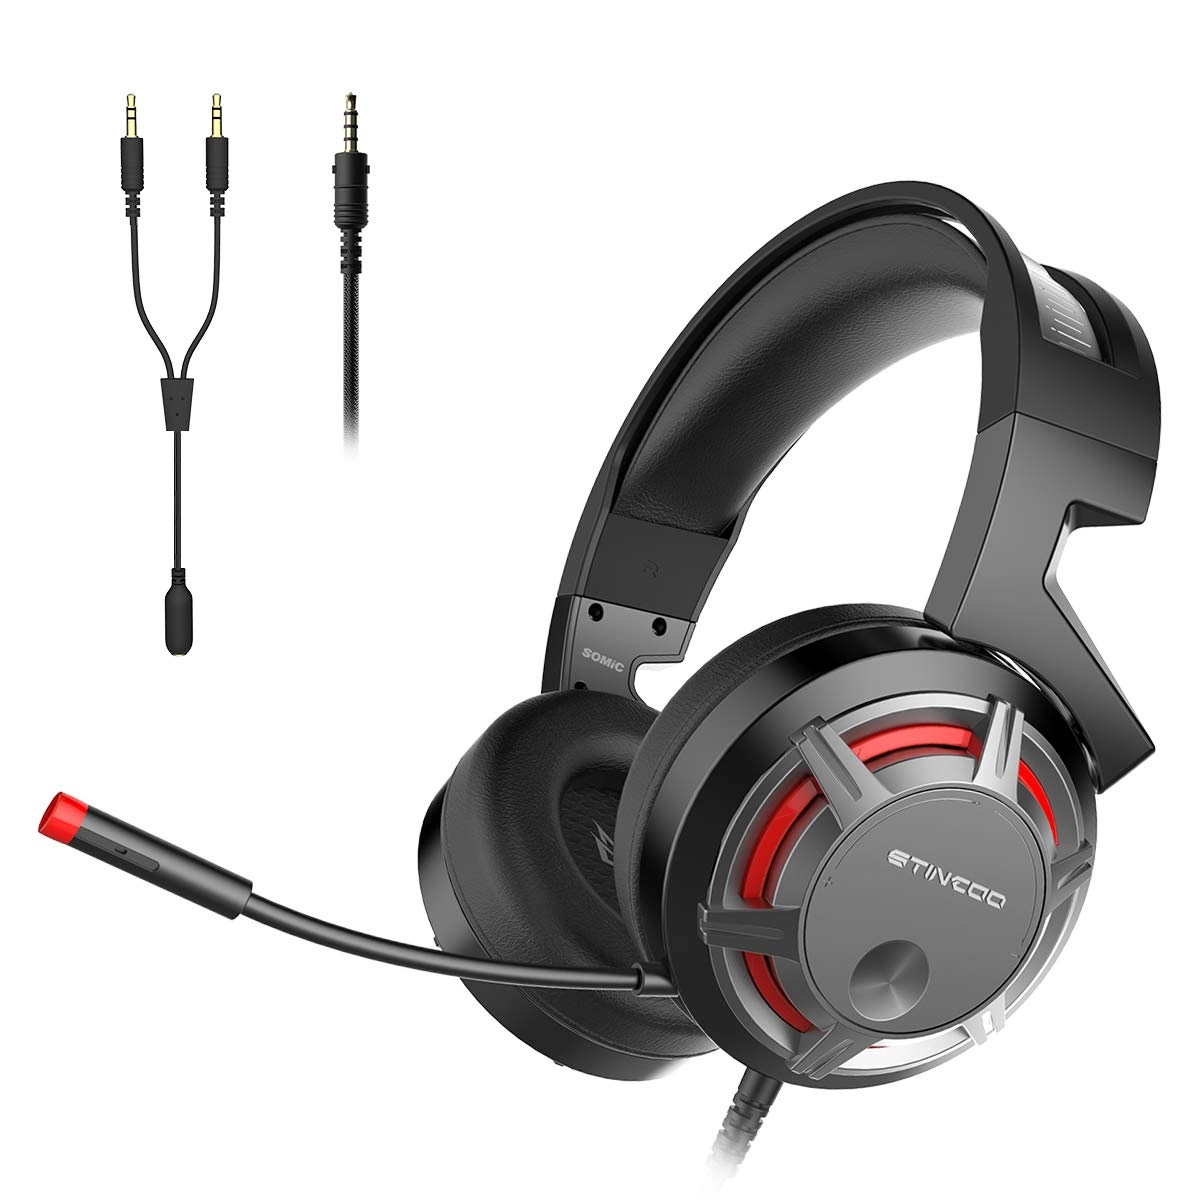 SOMiC G926S 3.5mm wired headset pc gaming headset for computer with mic